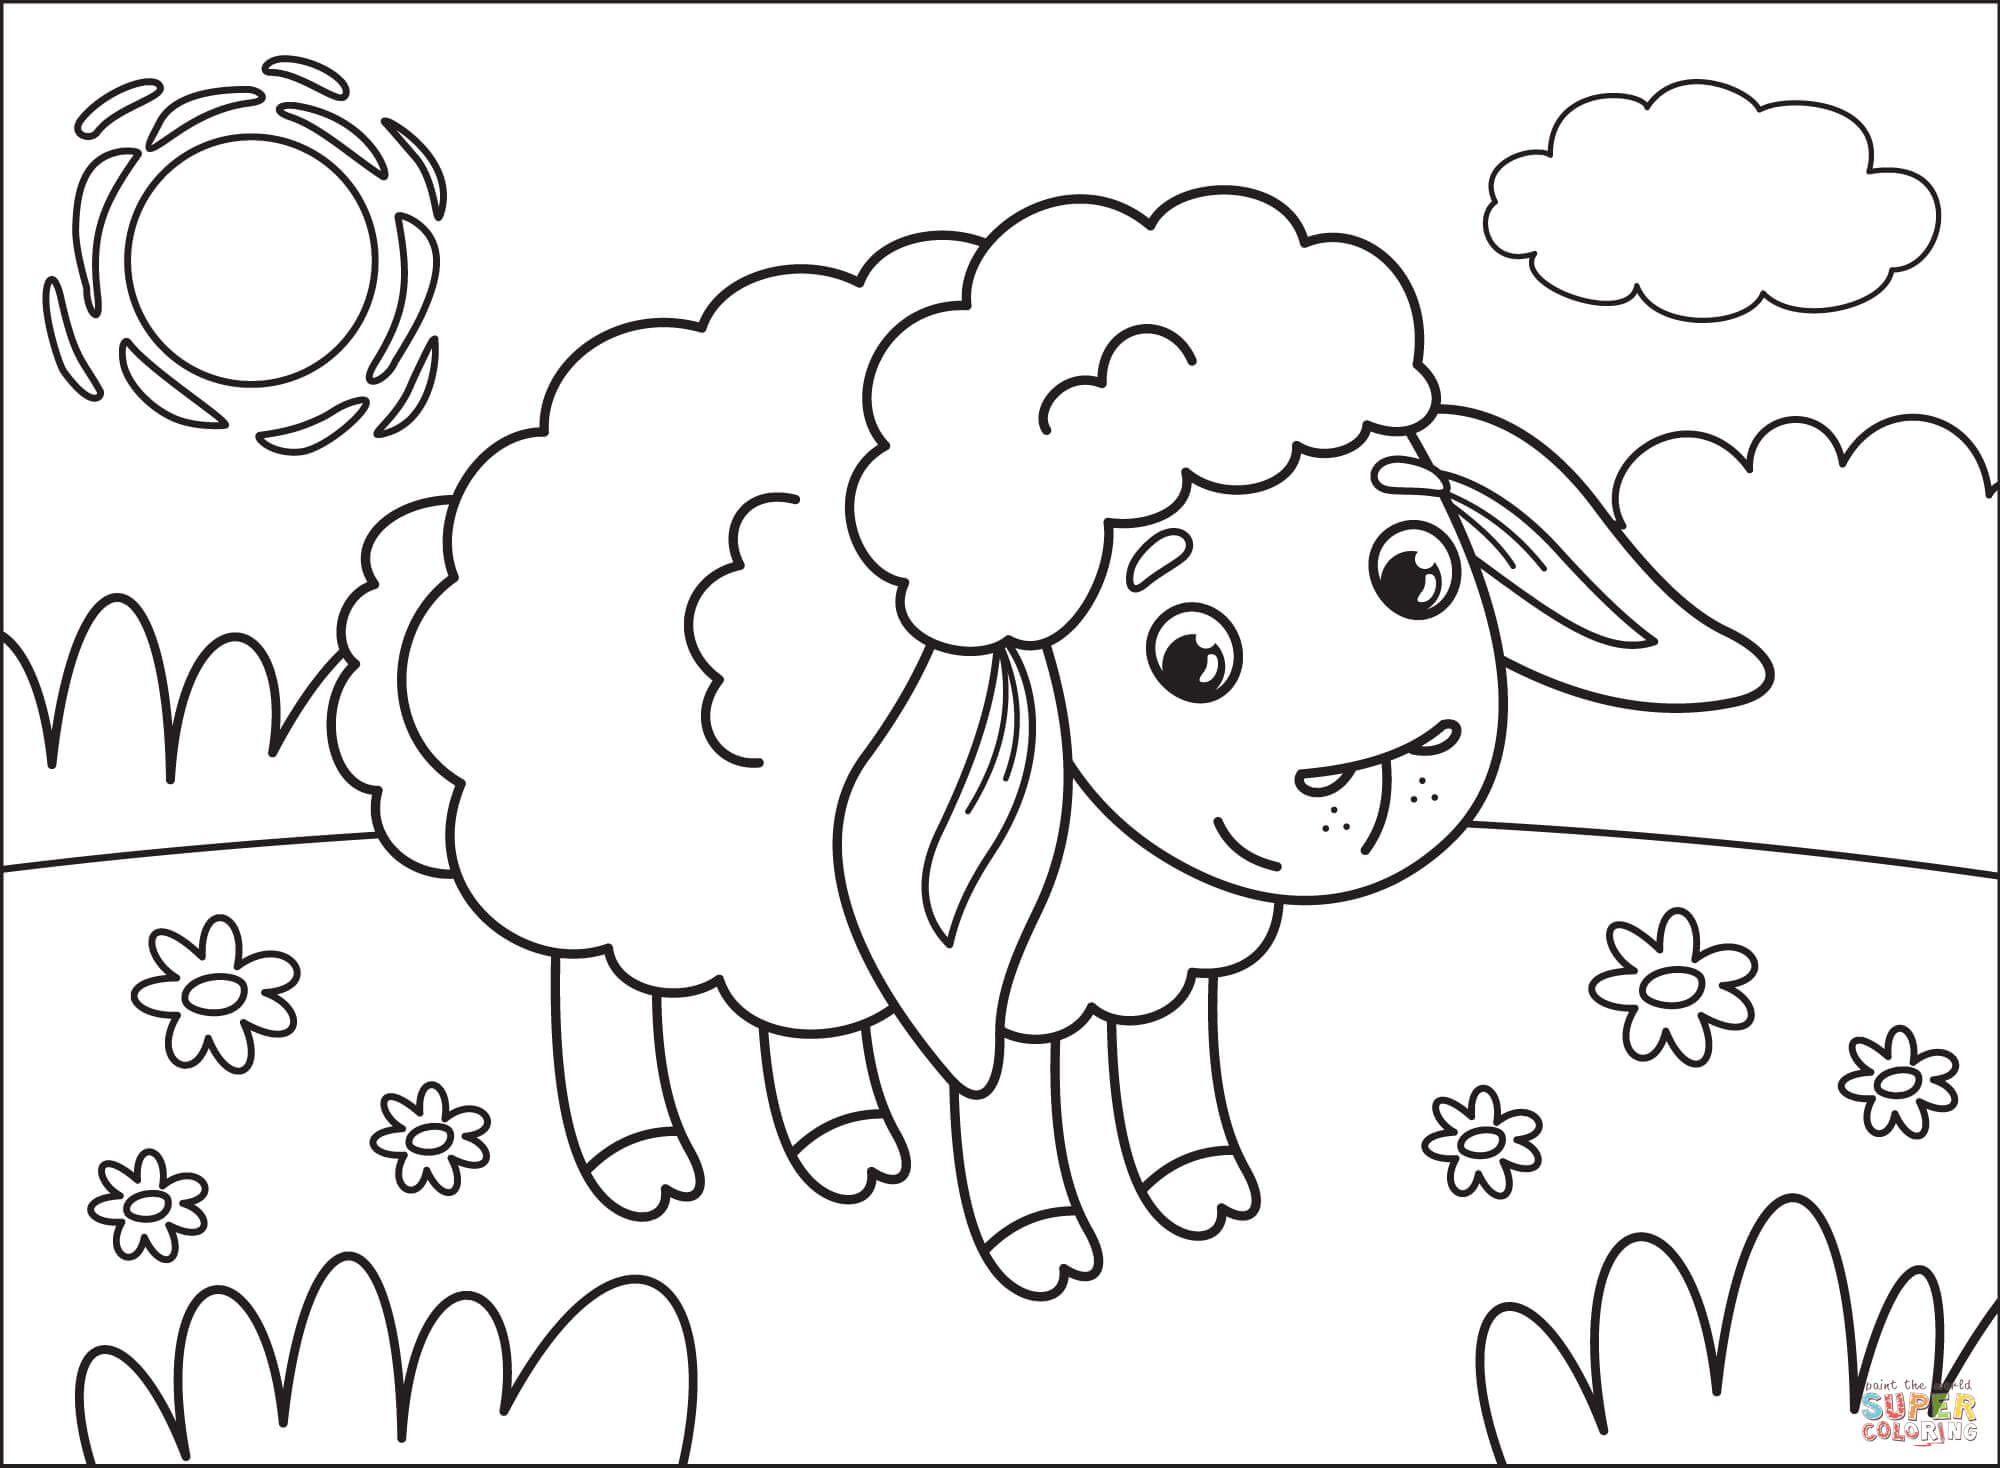 Lamb coloring page free printable coloring pages